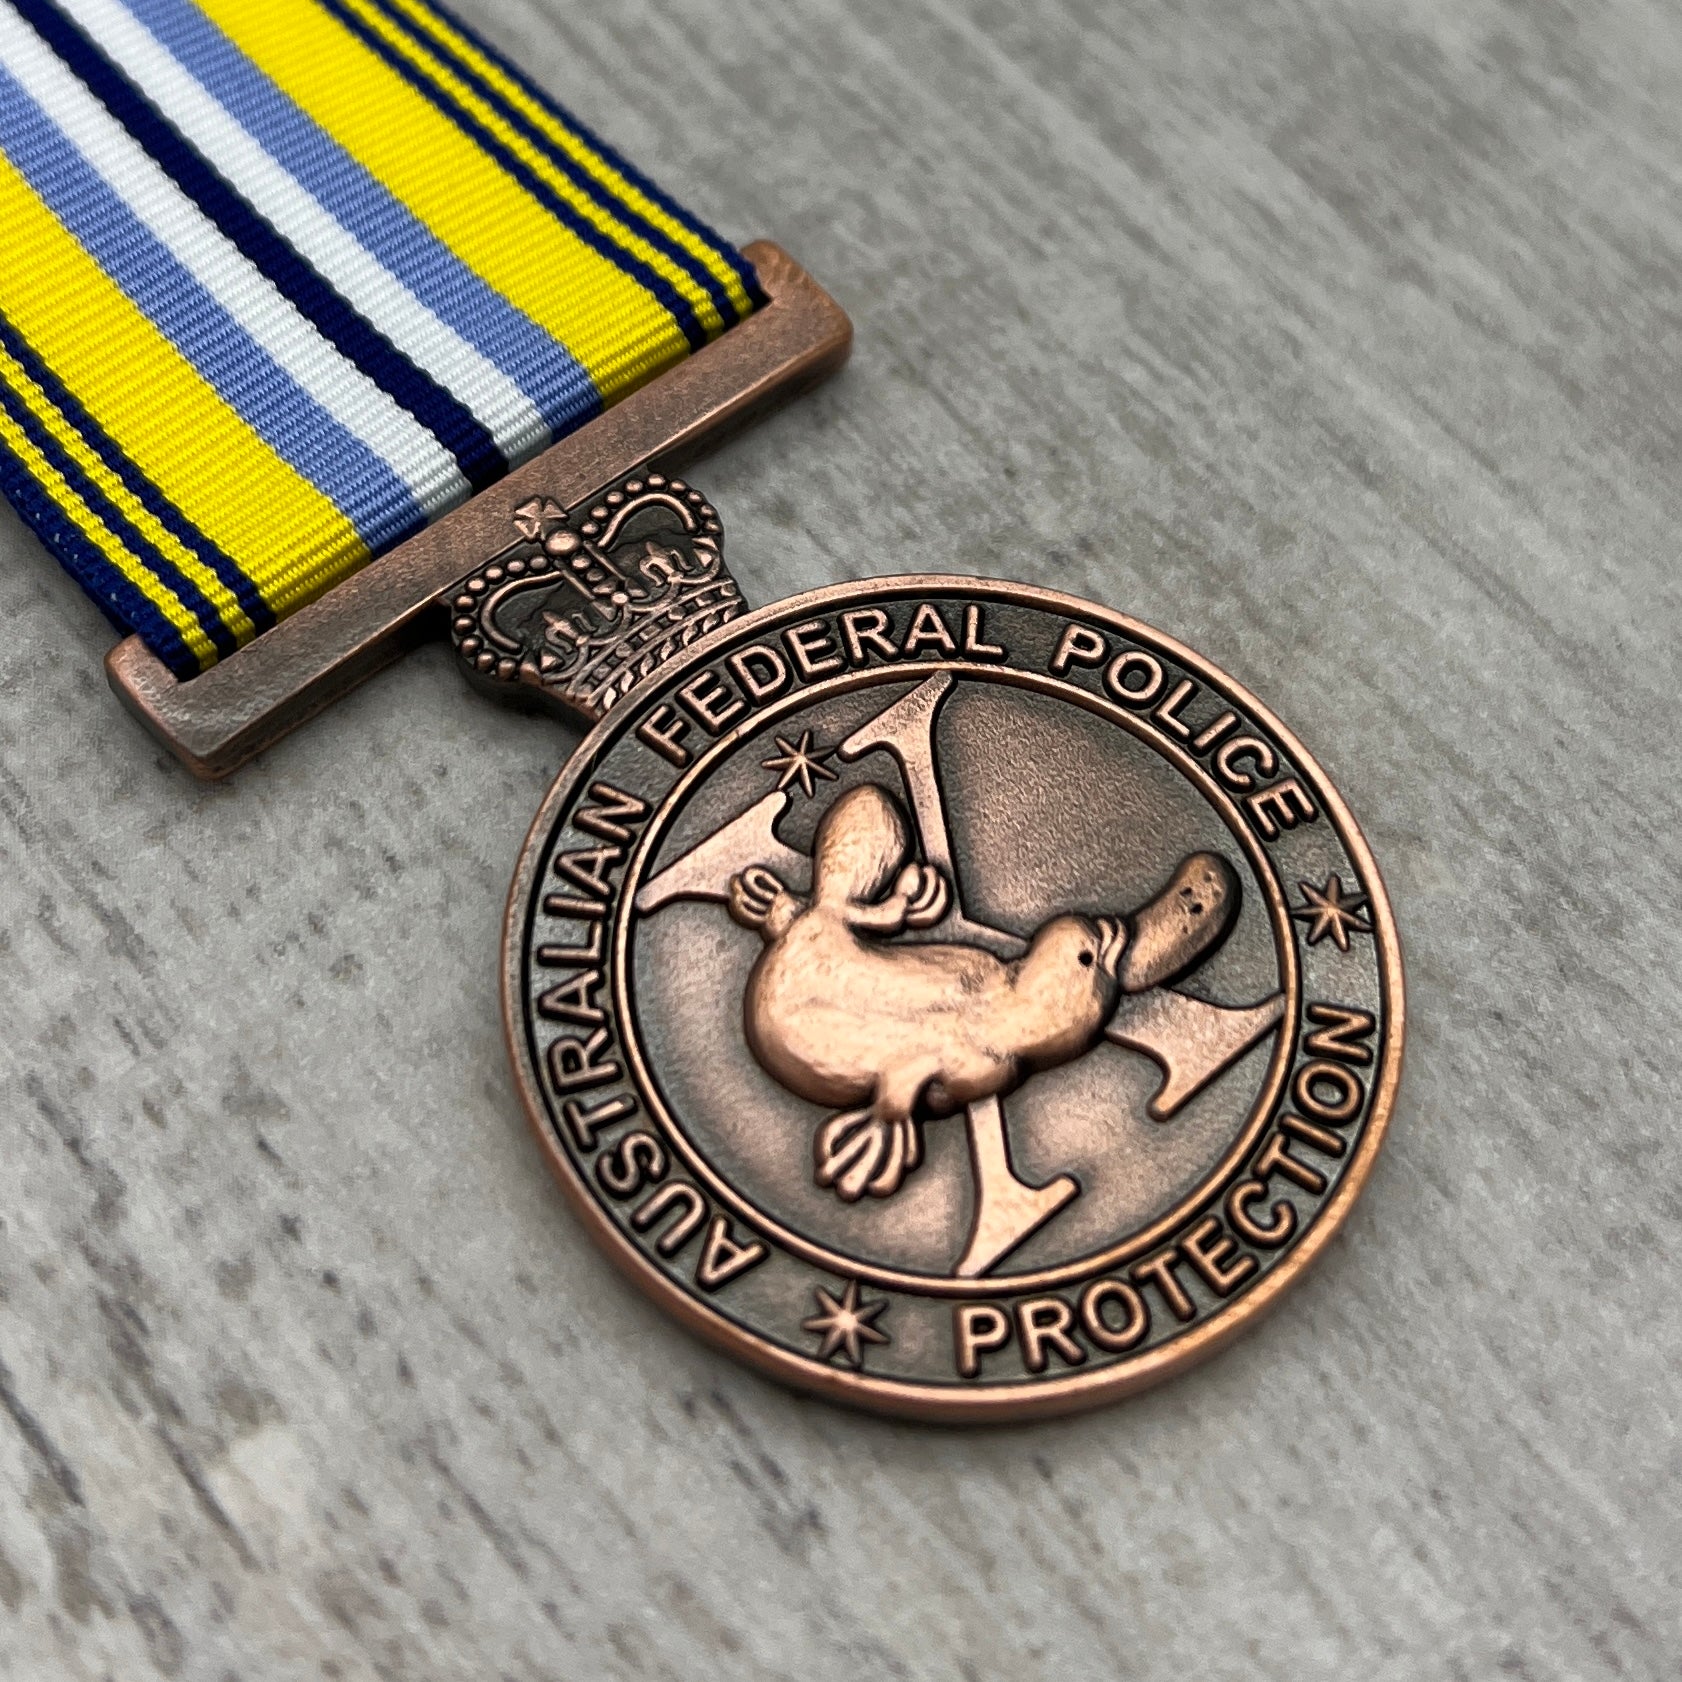 Australian Federal Police - Protective Service Medal - Foxhole Medals